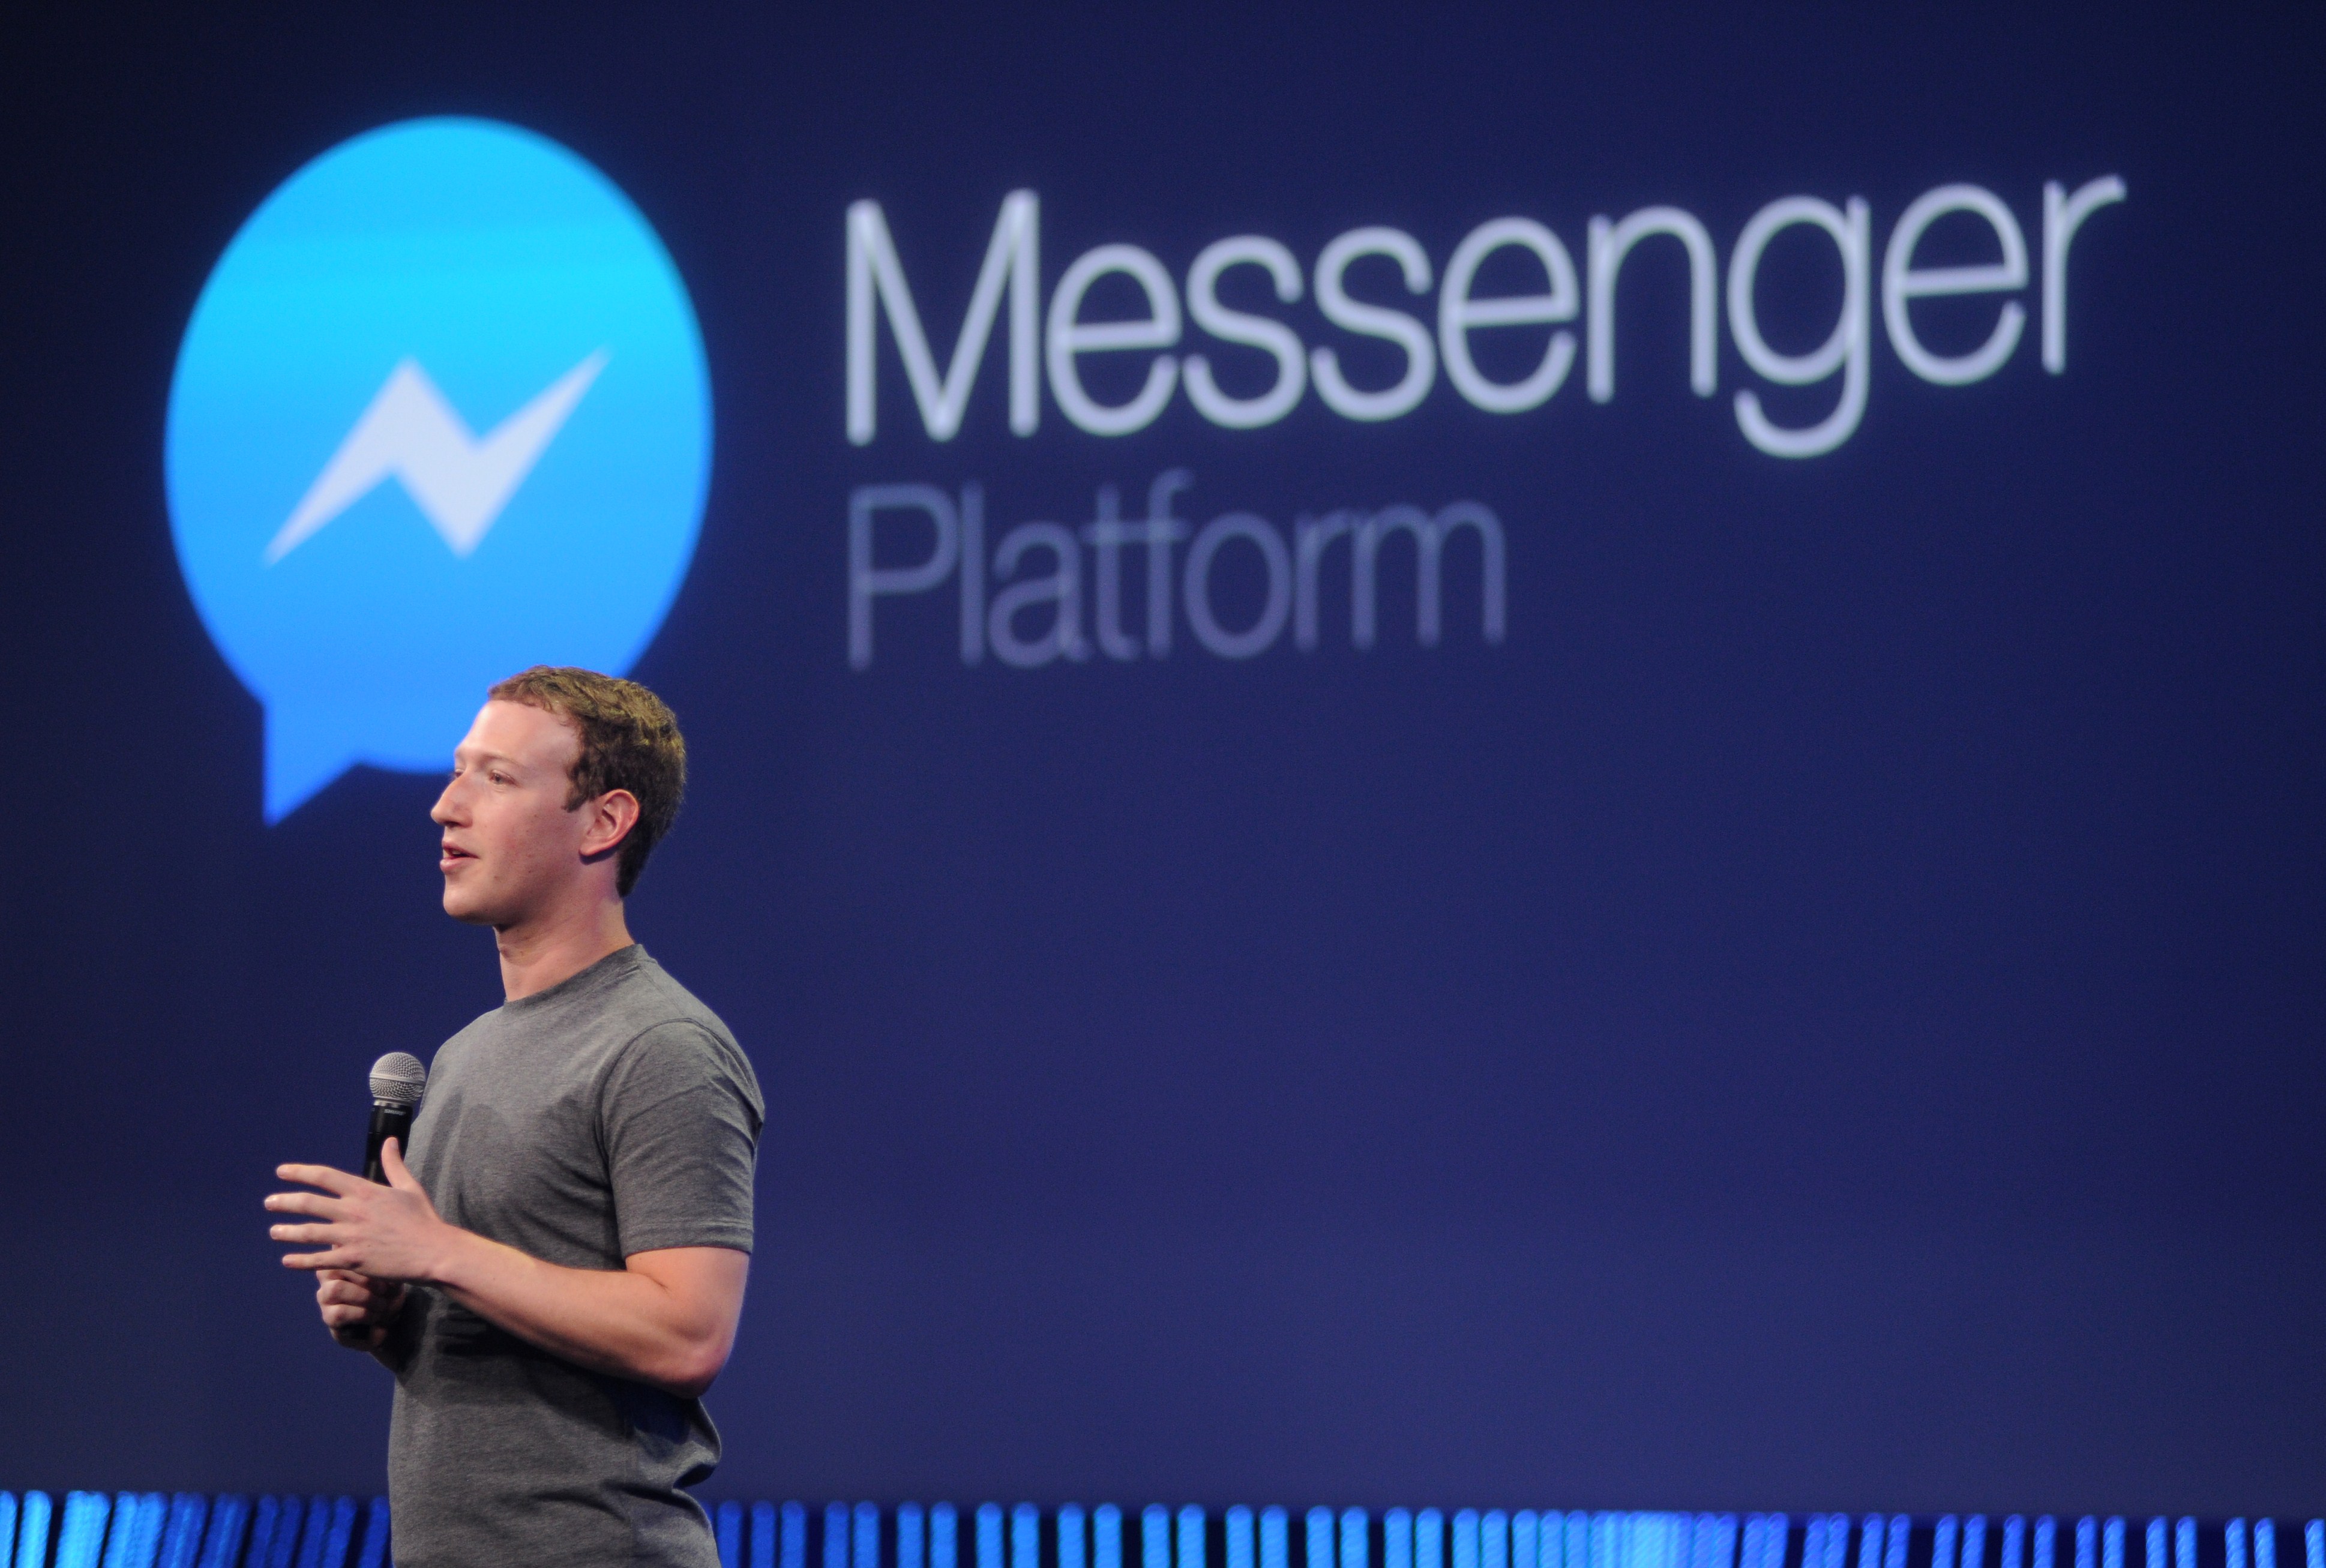 Facebook CEO Mark Zuckerberg introduces a new messenger platform at the F8 summit in San Francisco, California, on March 25, 2015. (Josh Edelson—AFP—Getty Images)